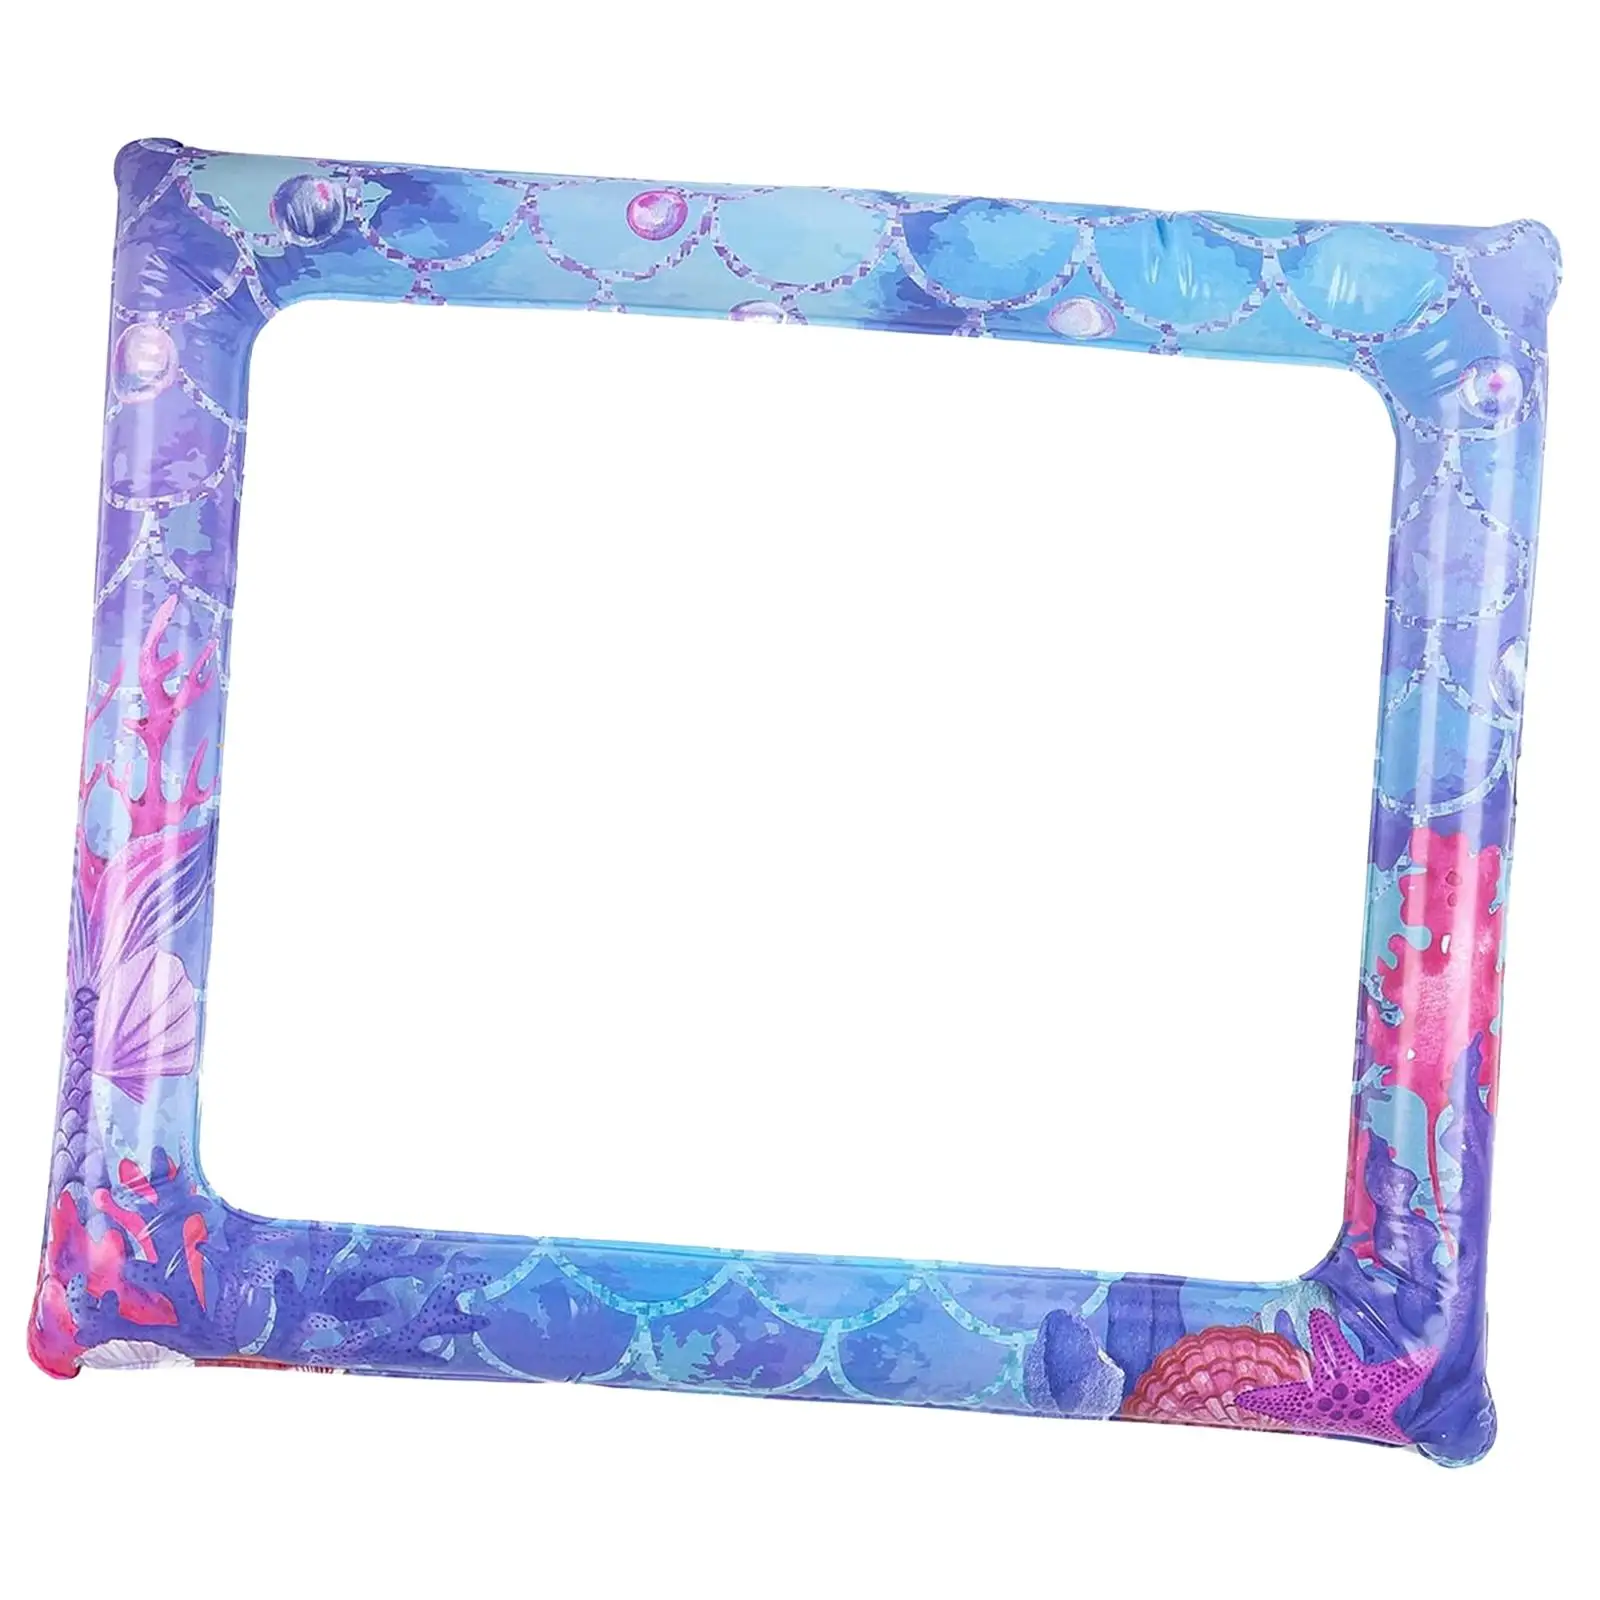 Inflatable Photo Frame Party Decoration Mermaid Themed Large Picture Frame Balloon Selfie Photo Frame Photo Booth Props